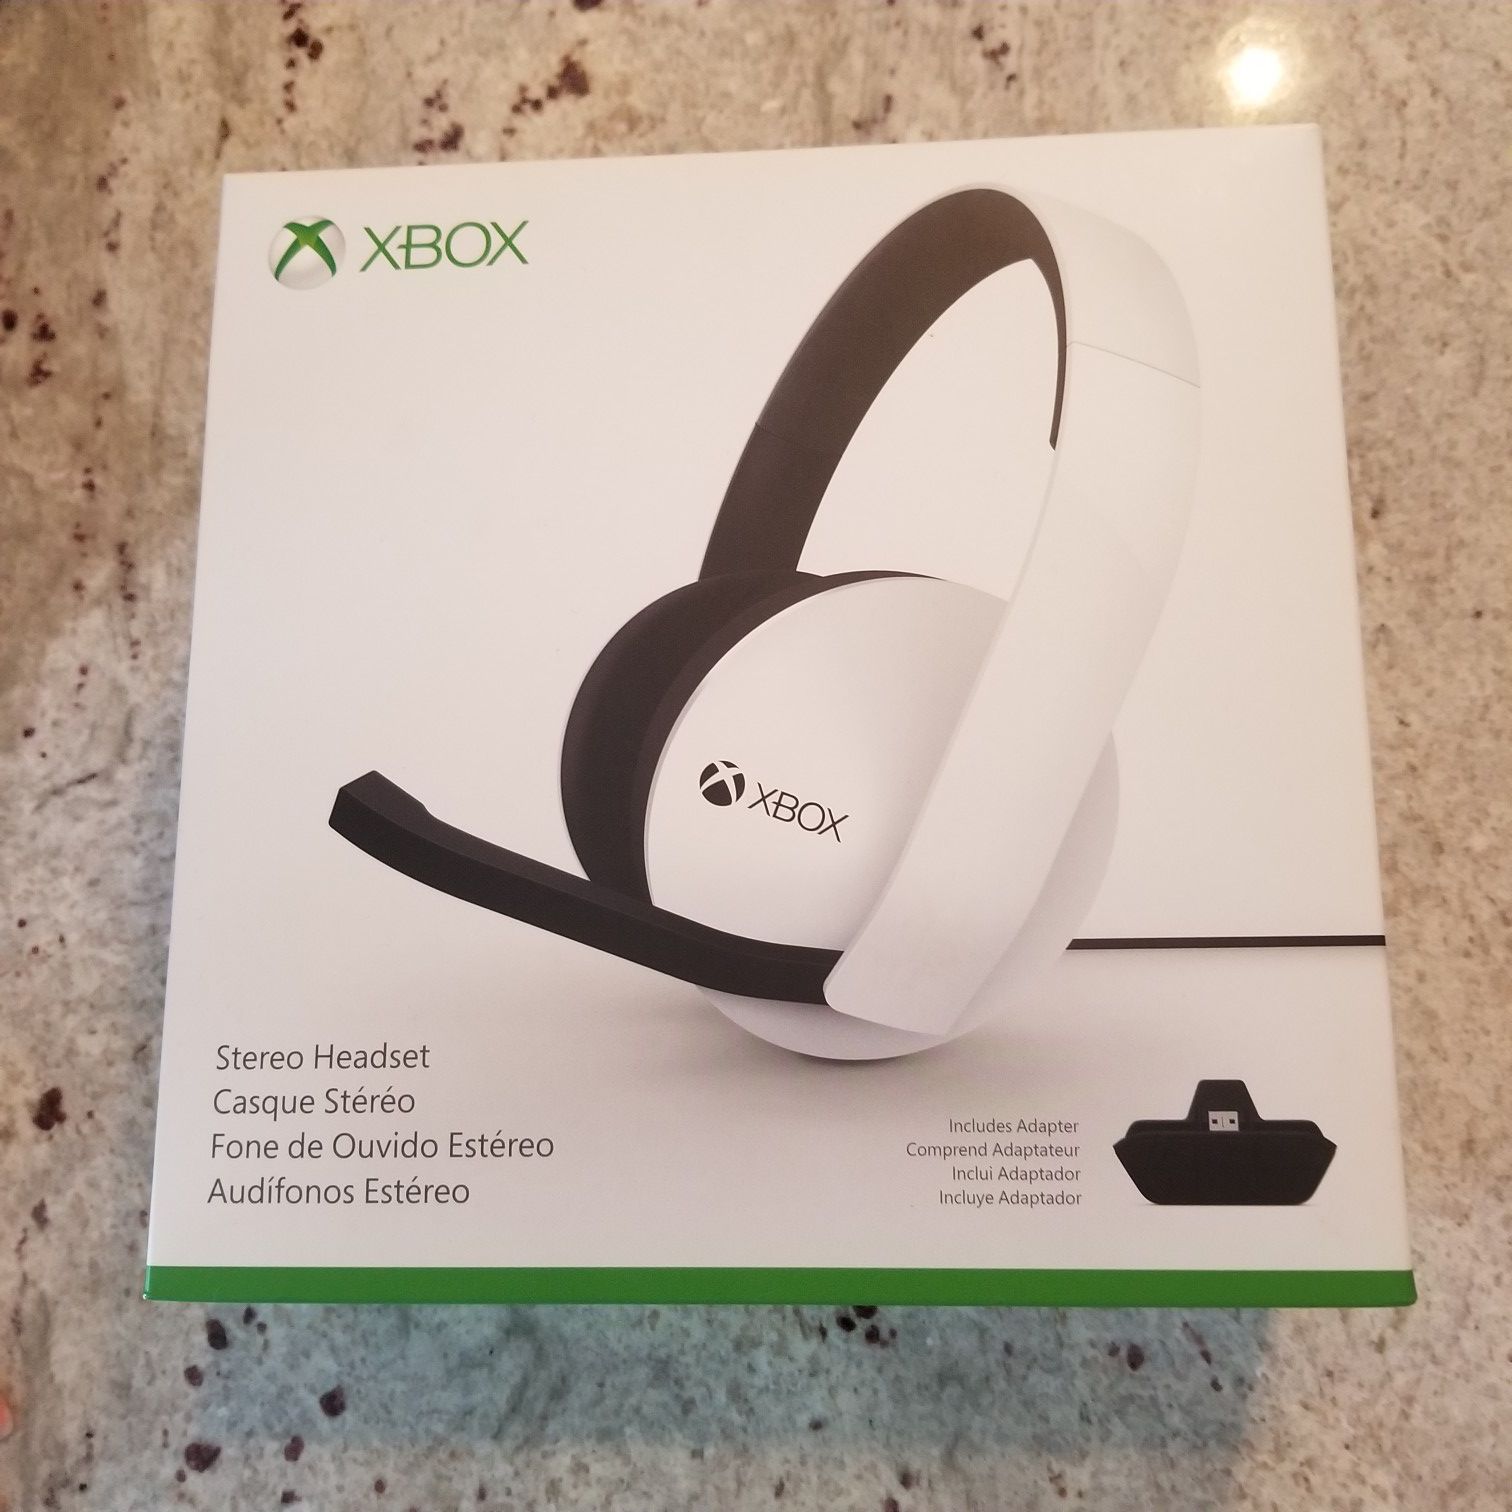 Xbox Stereo Headset barely used